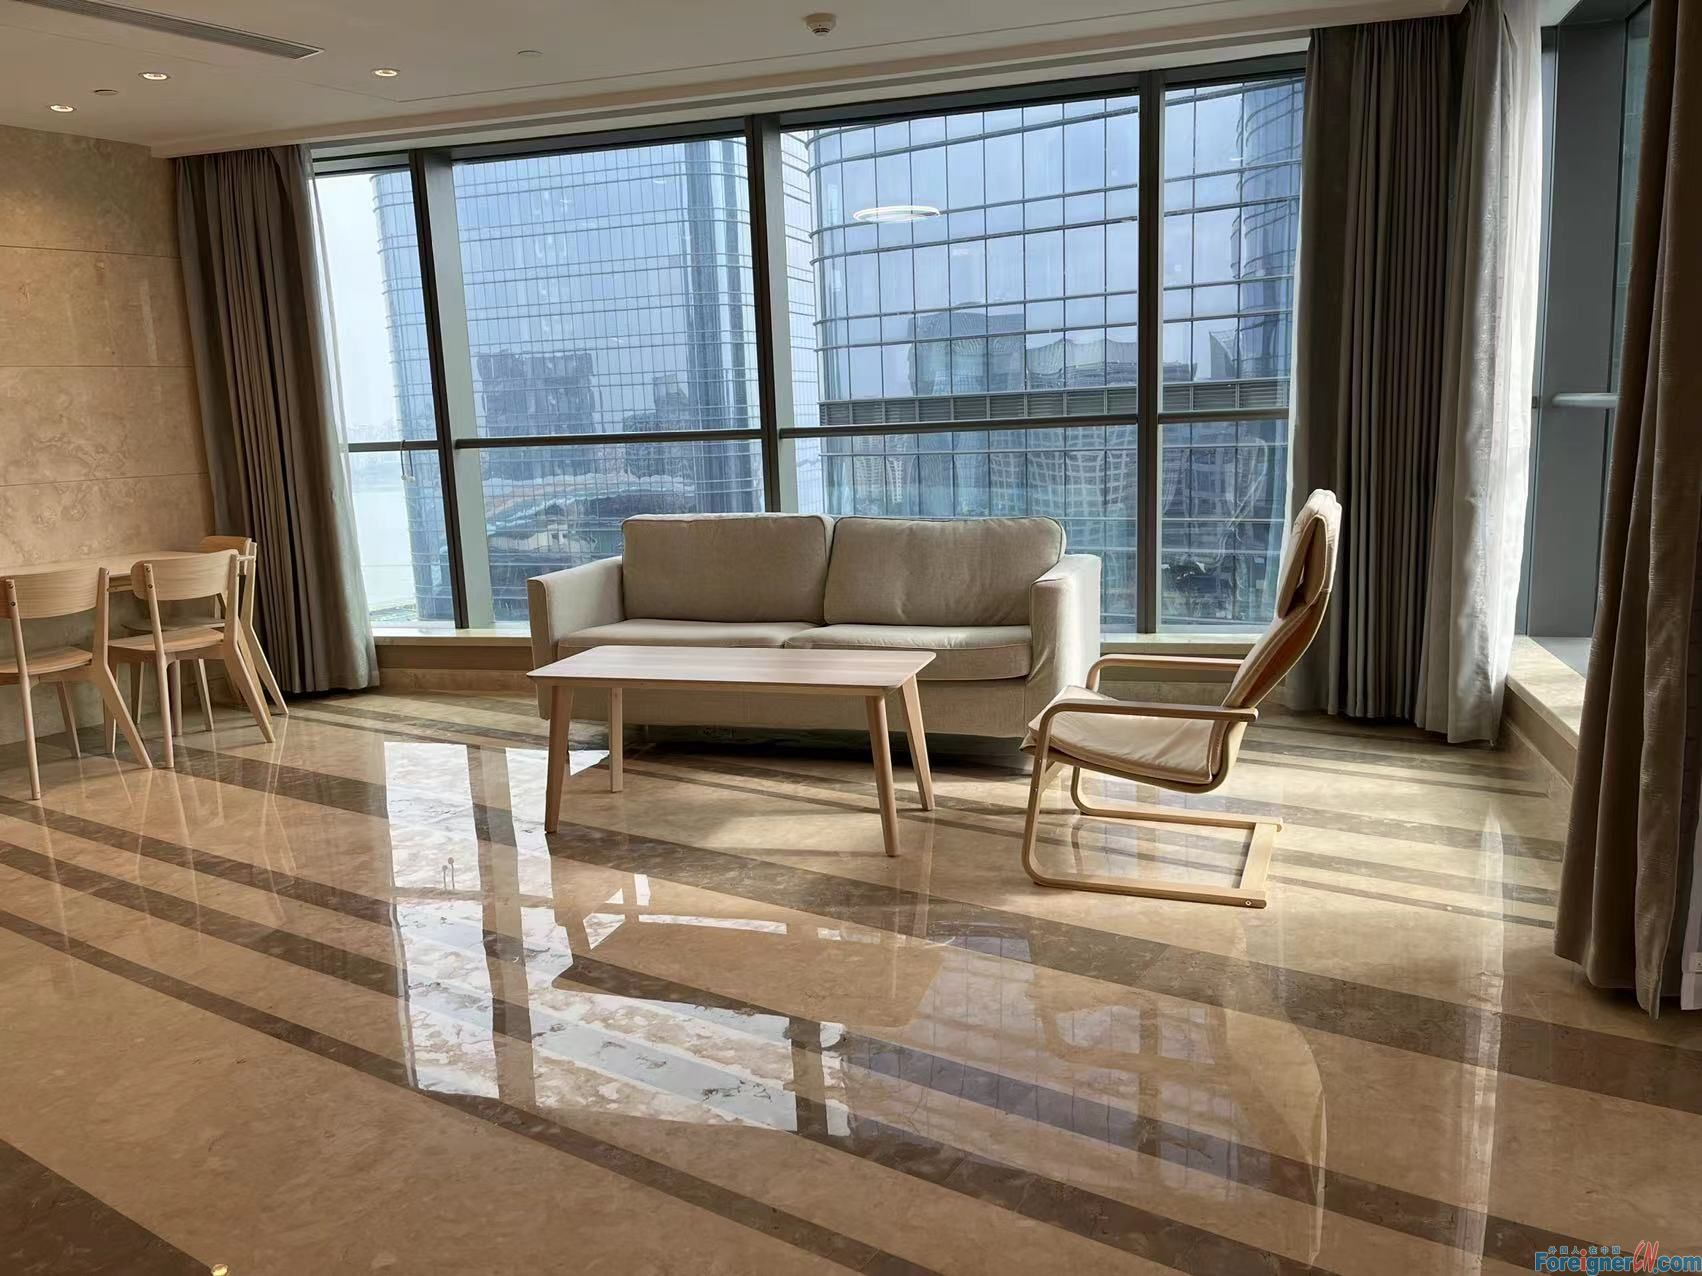 Excellent！！！Suzhou Center No.9 apartment to rent/2 bedrooms and 2 bathroom/High floor/Central AC /Amazing lake view & city view/Suzhou Center shopping mall 